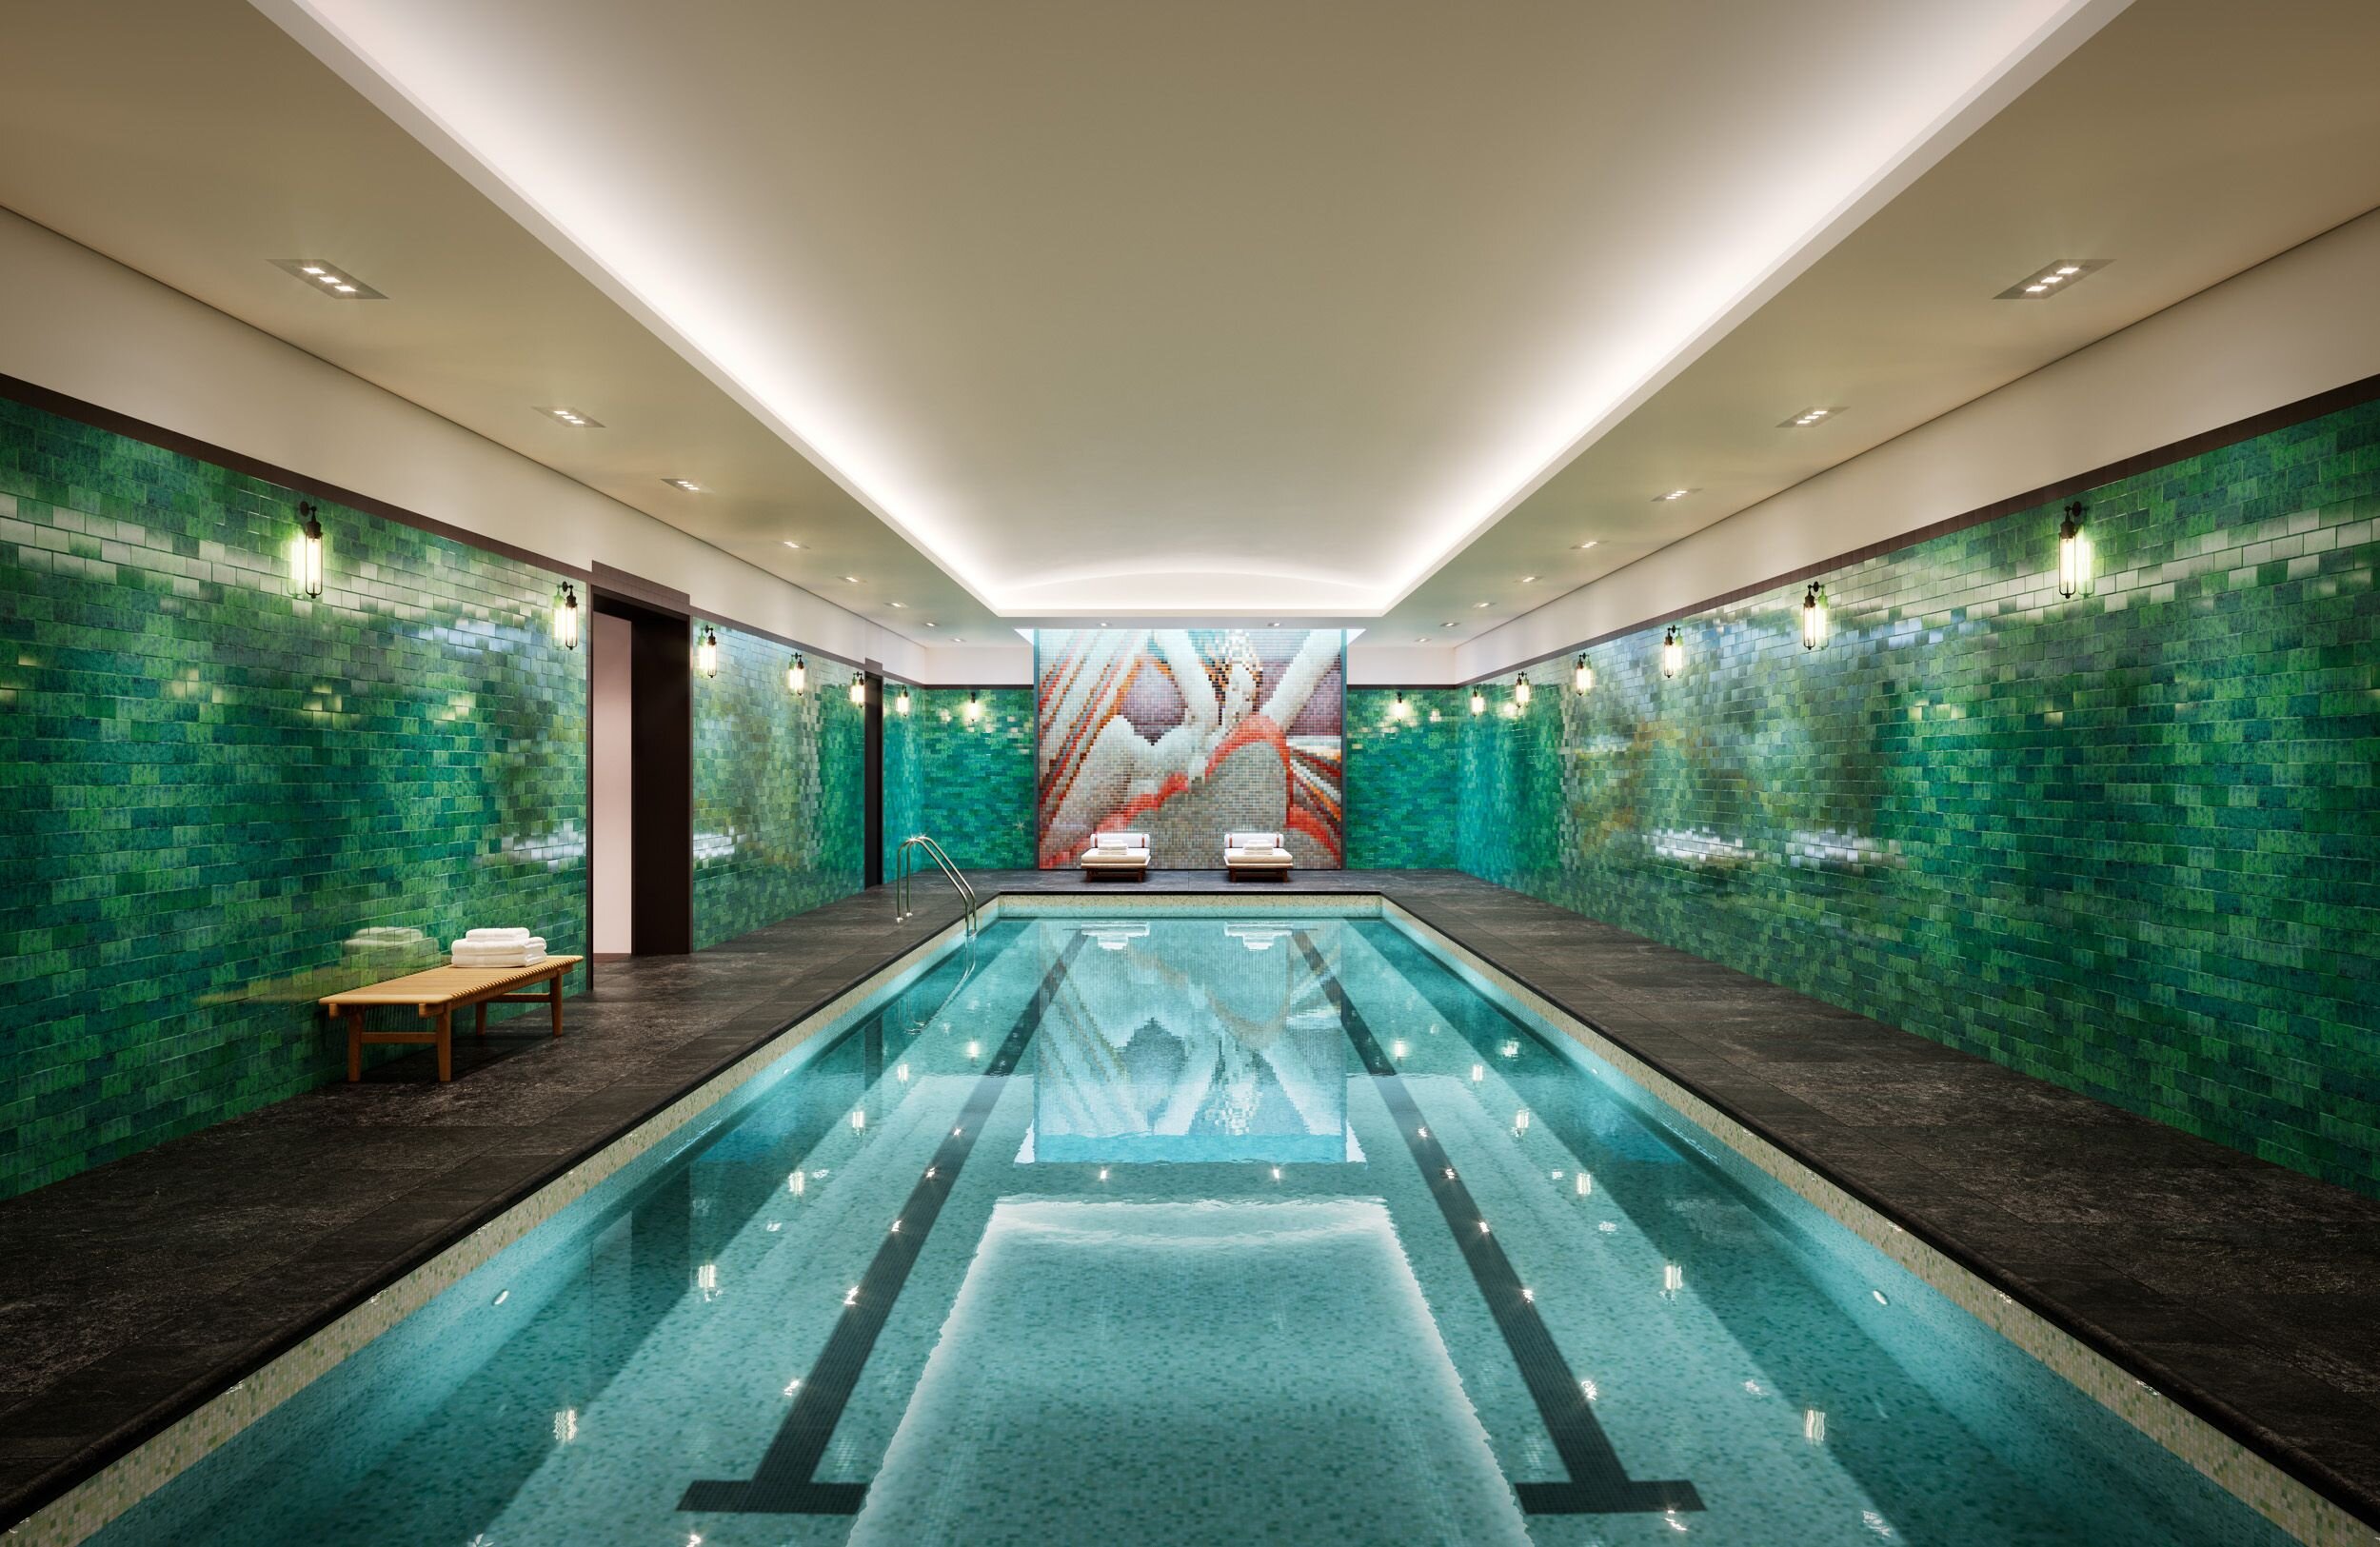   Swimming   With swimming playing a prominent role in this year’s Olympic Games, we can’t think of a better place to practice your freestyle than at Rose Hill's striking indoor pool. Developed by the original builders of Rockefeller Center and desig